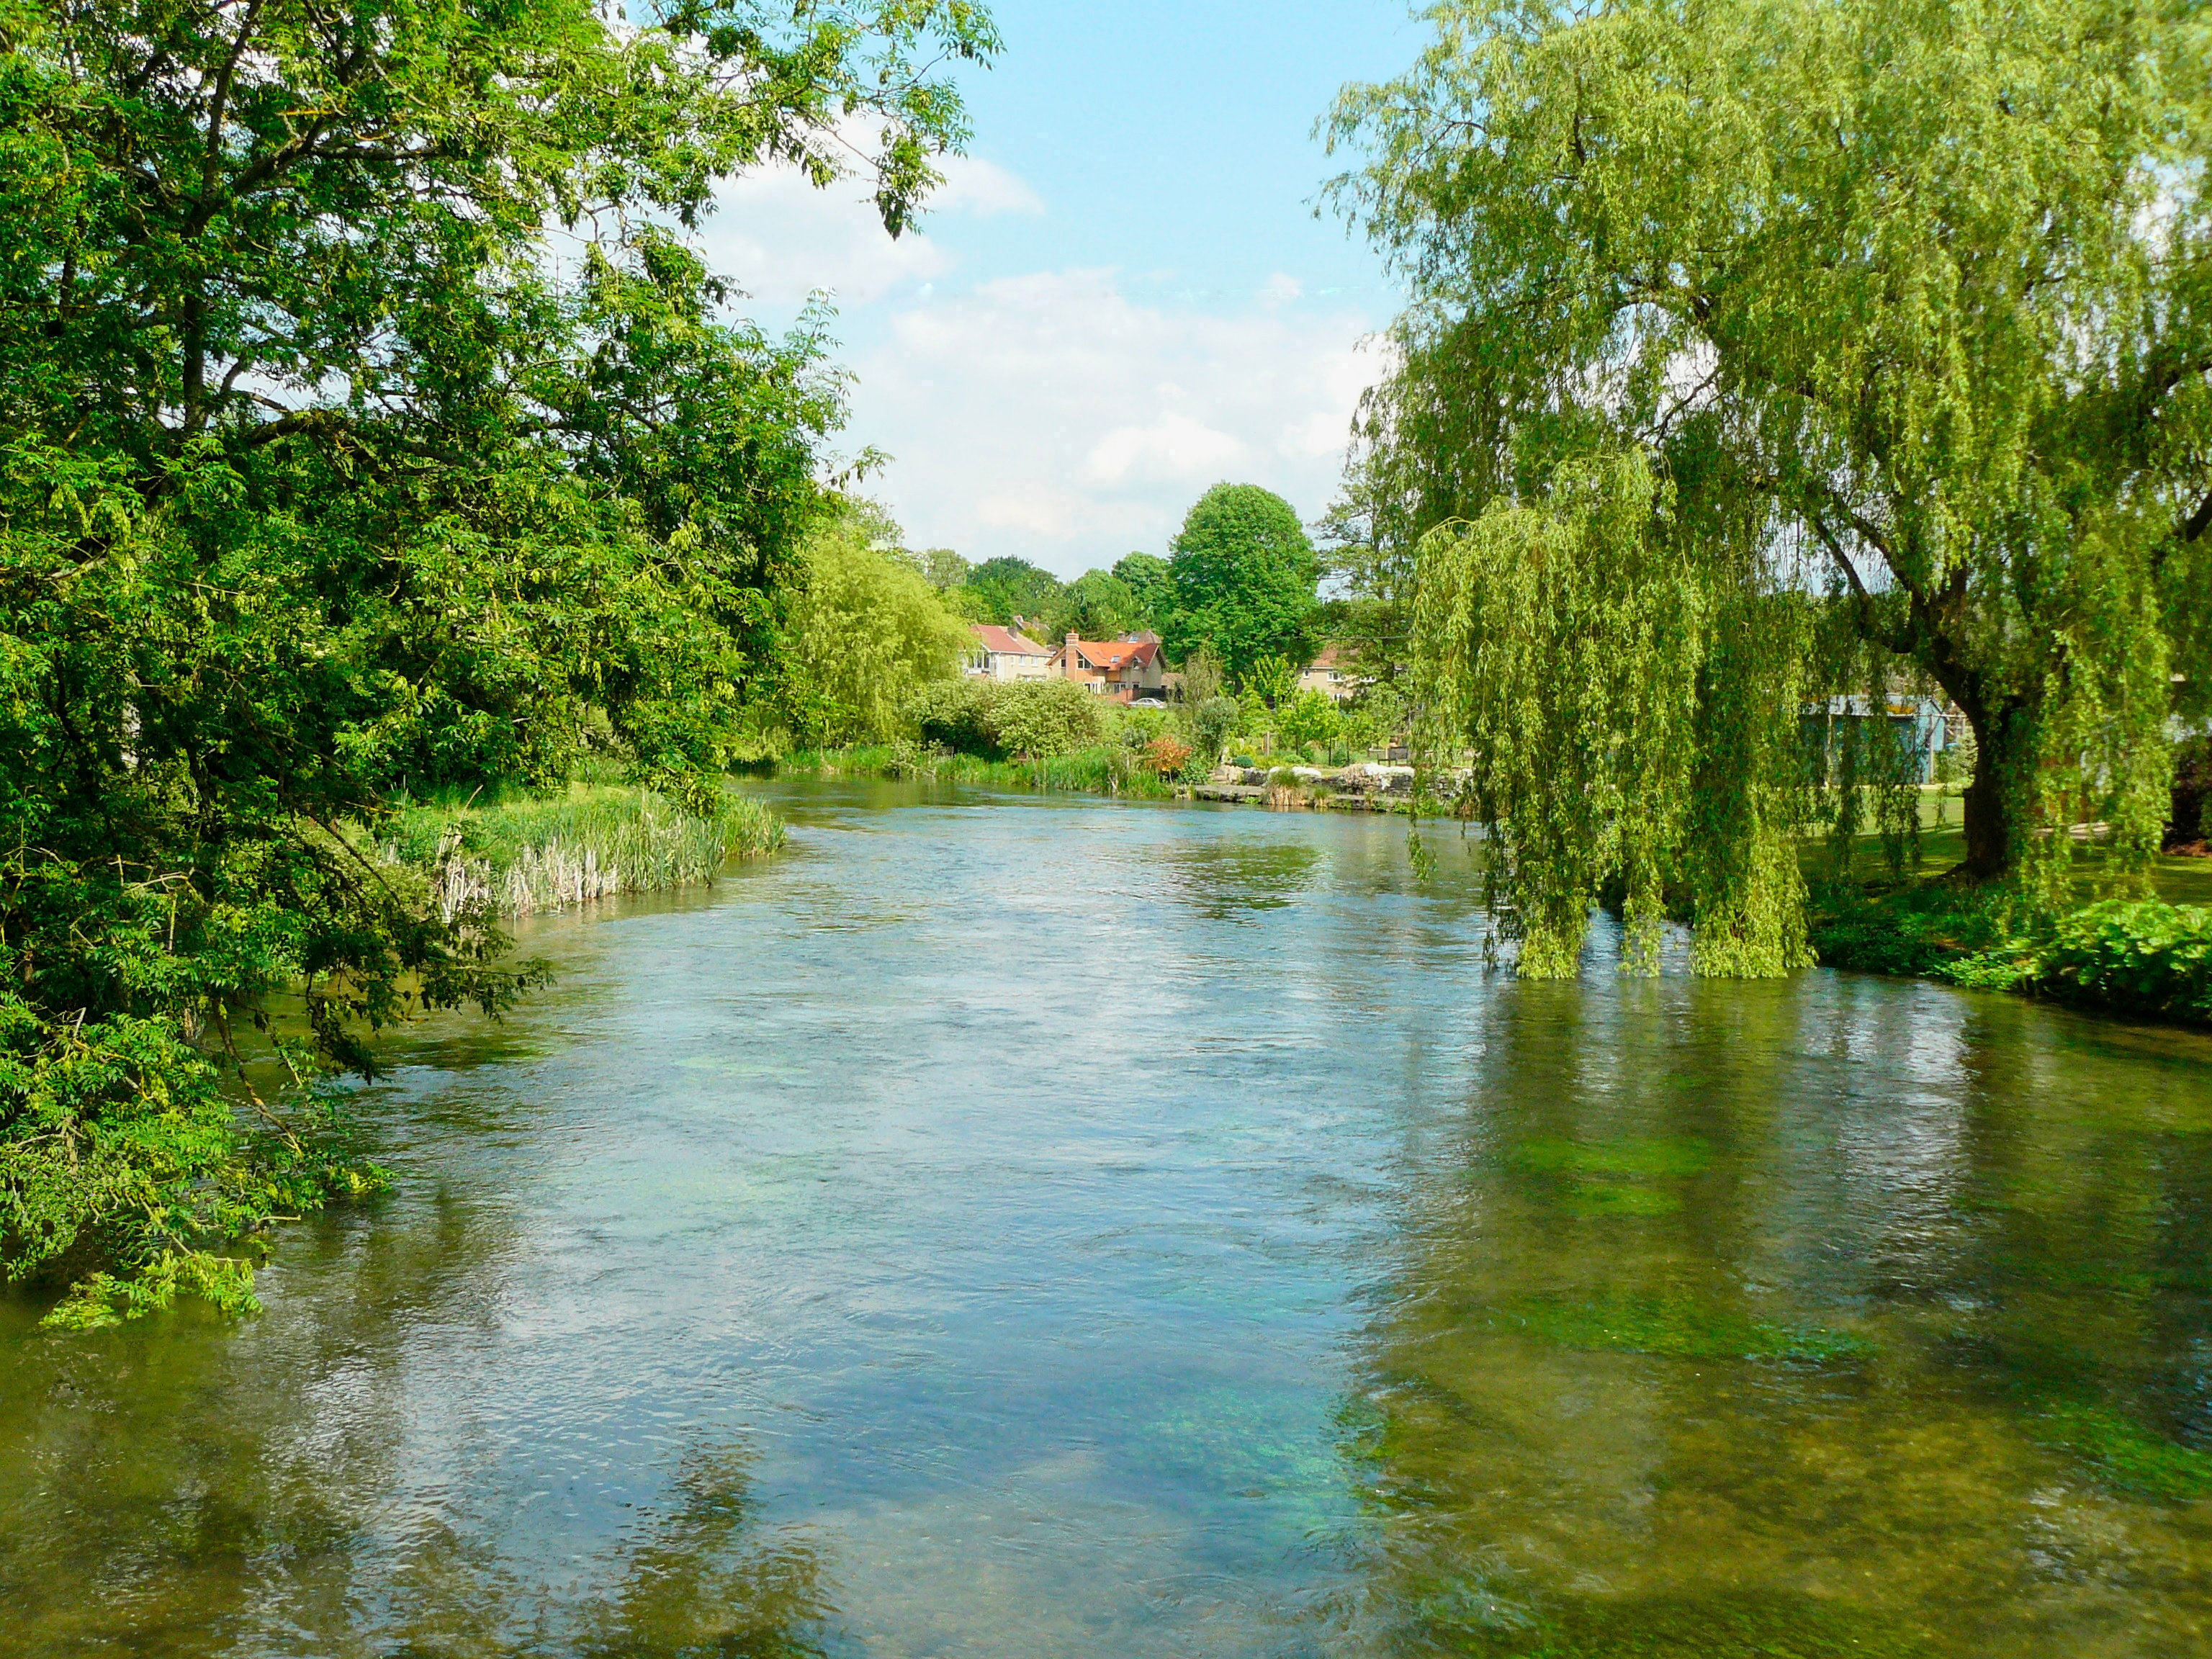 The River Itchen at Twyford – Stephen says…